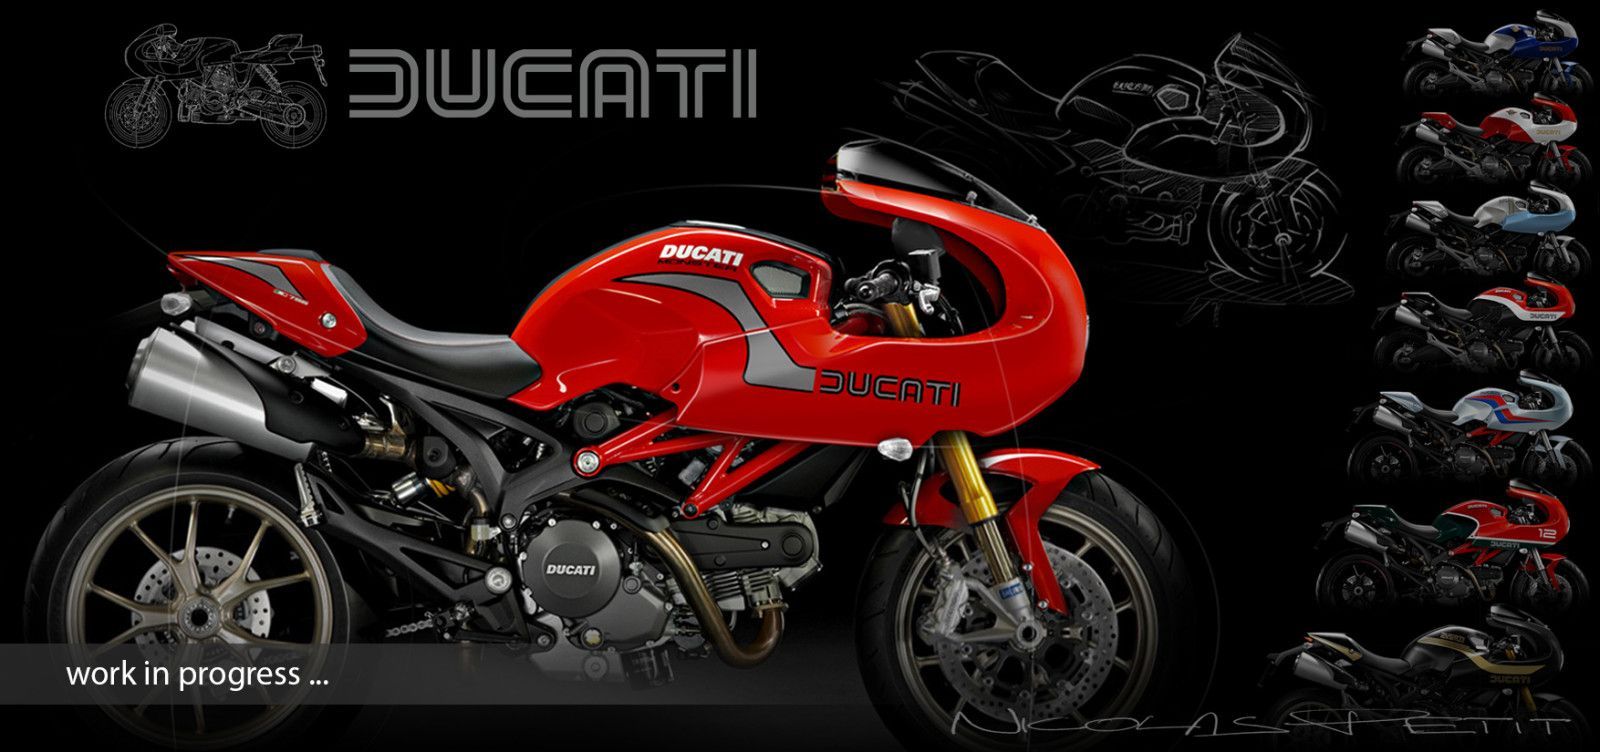 Nicolas's Ducati Monster Evo Cafe Racer does a stellar job of modifying an existing model to create something new and different